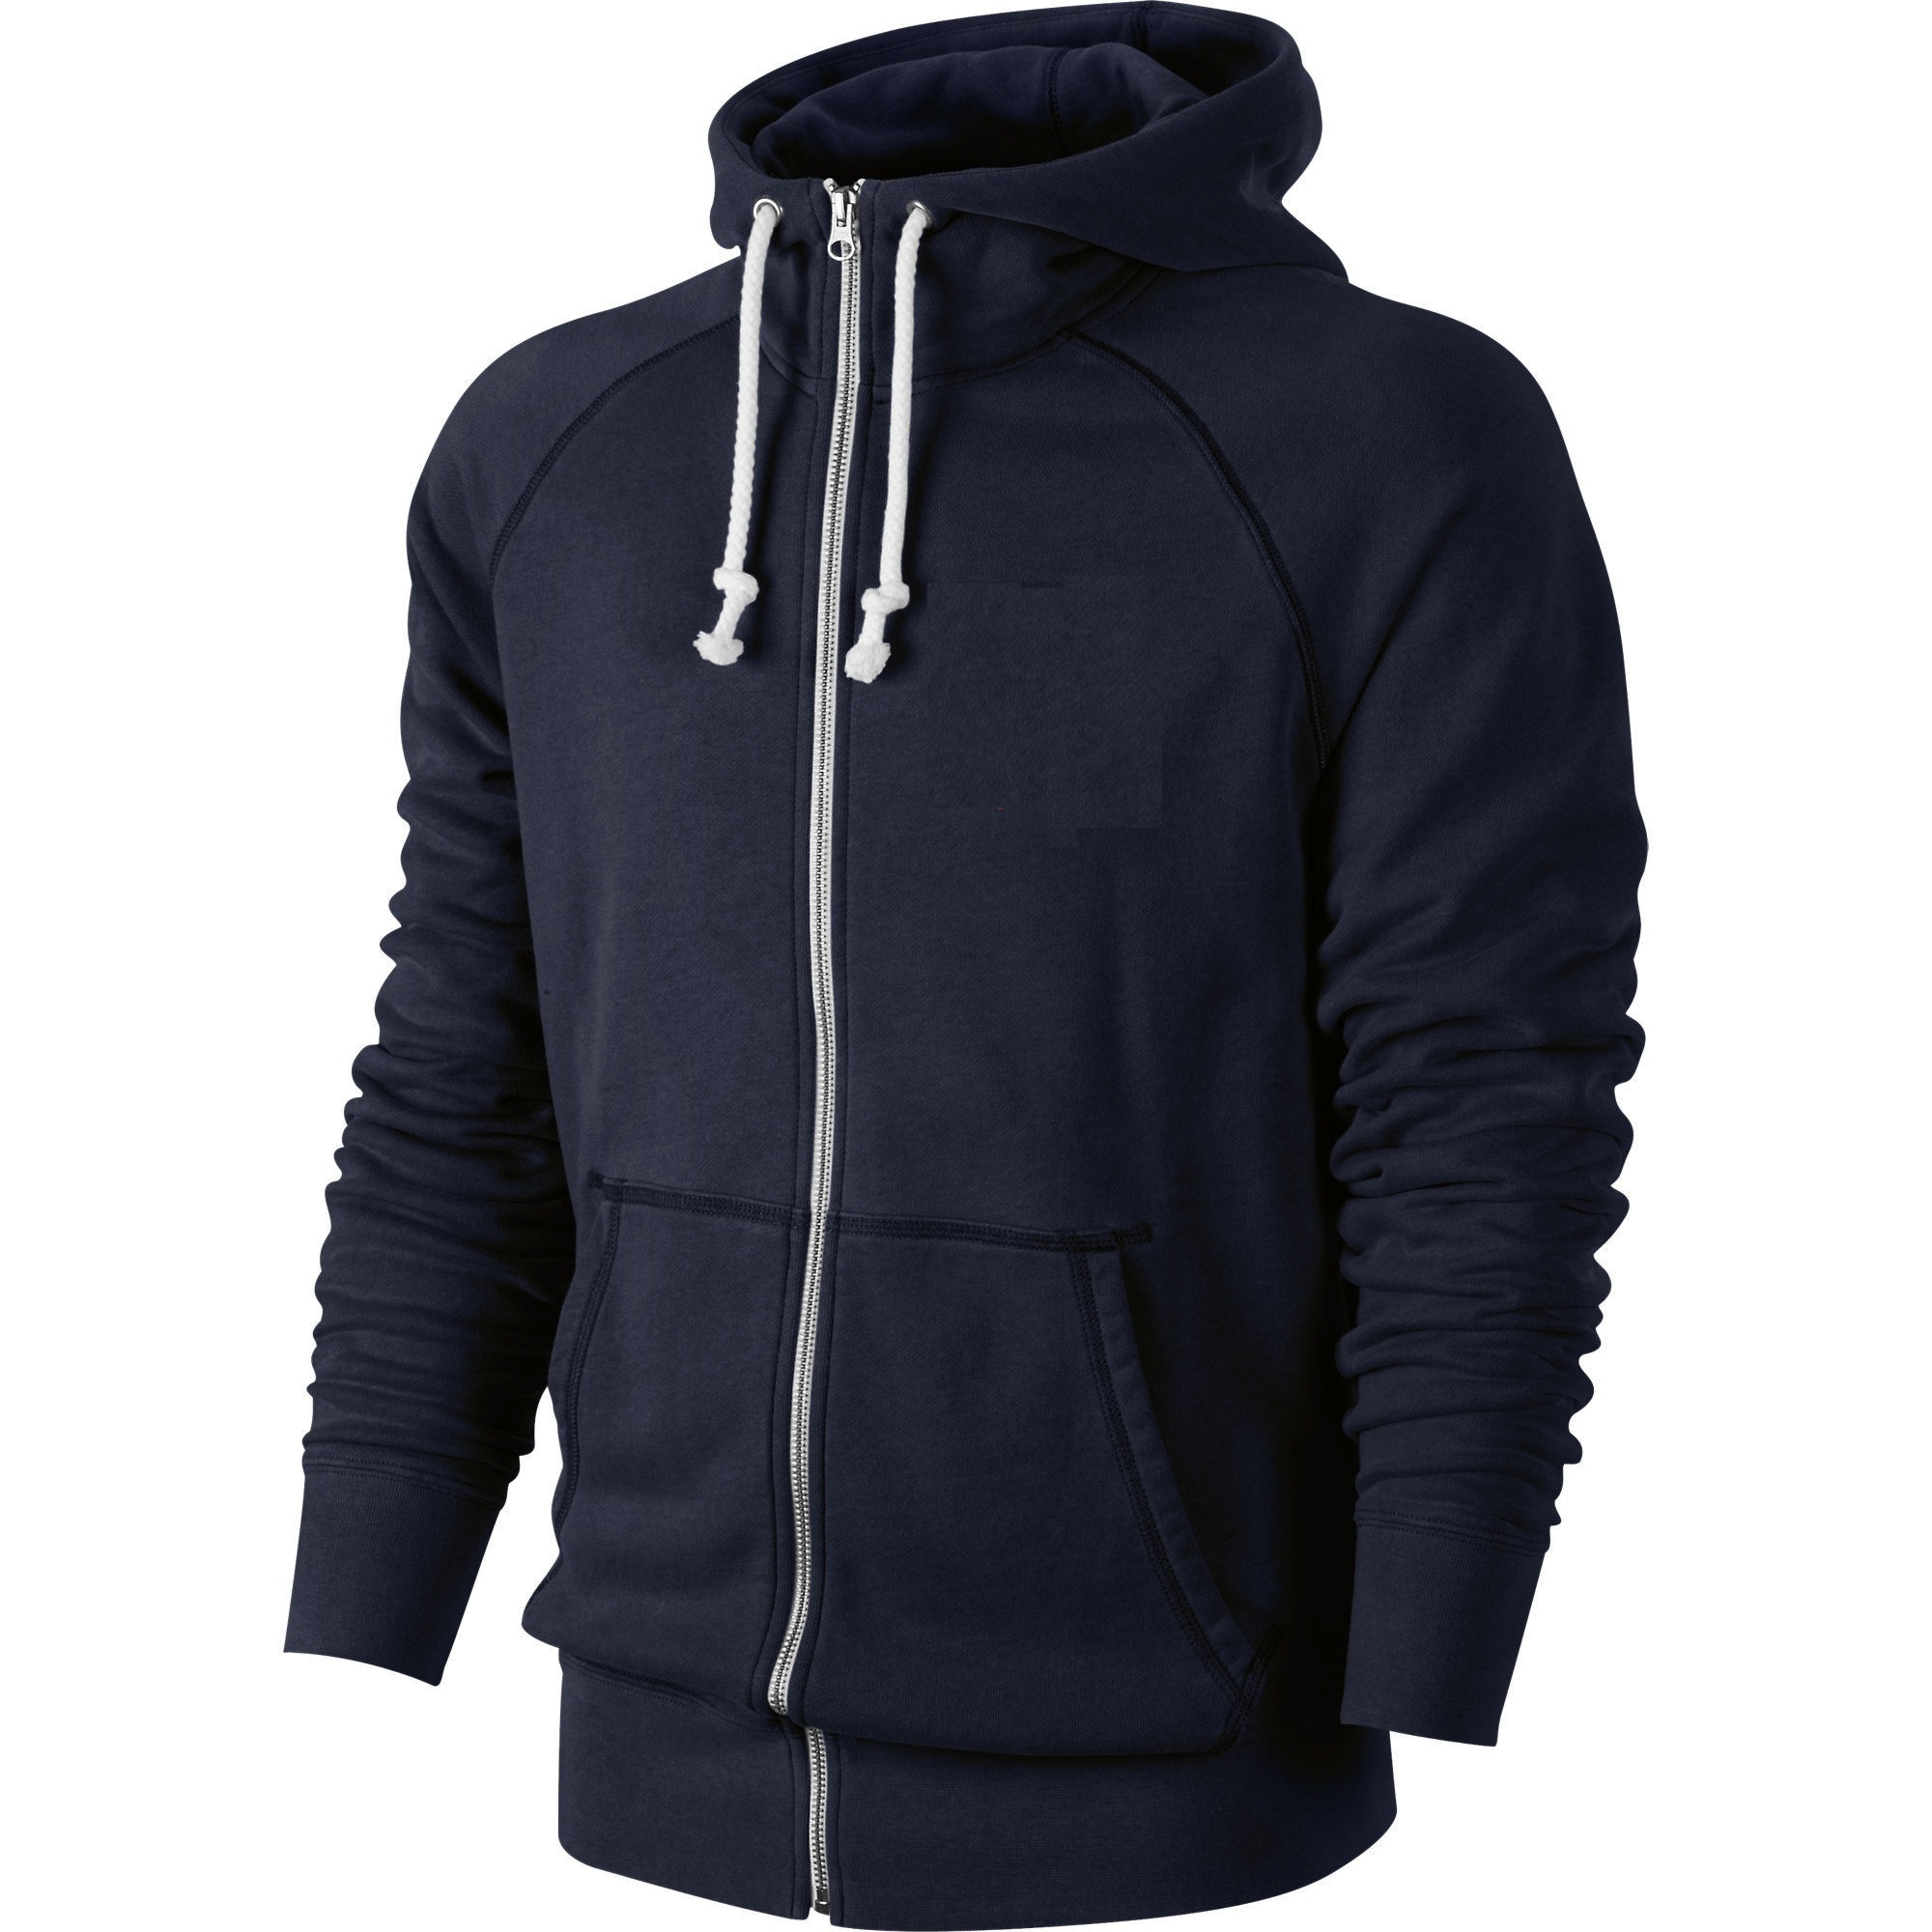 MEN’S HIGH QUALITY SOLID COLOR ZIPPED HODDIE